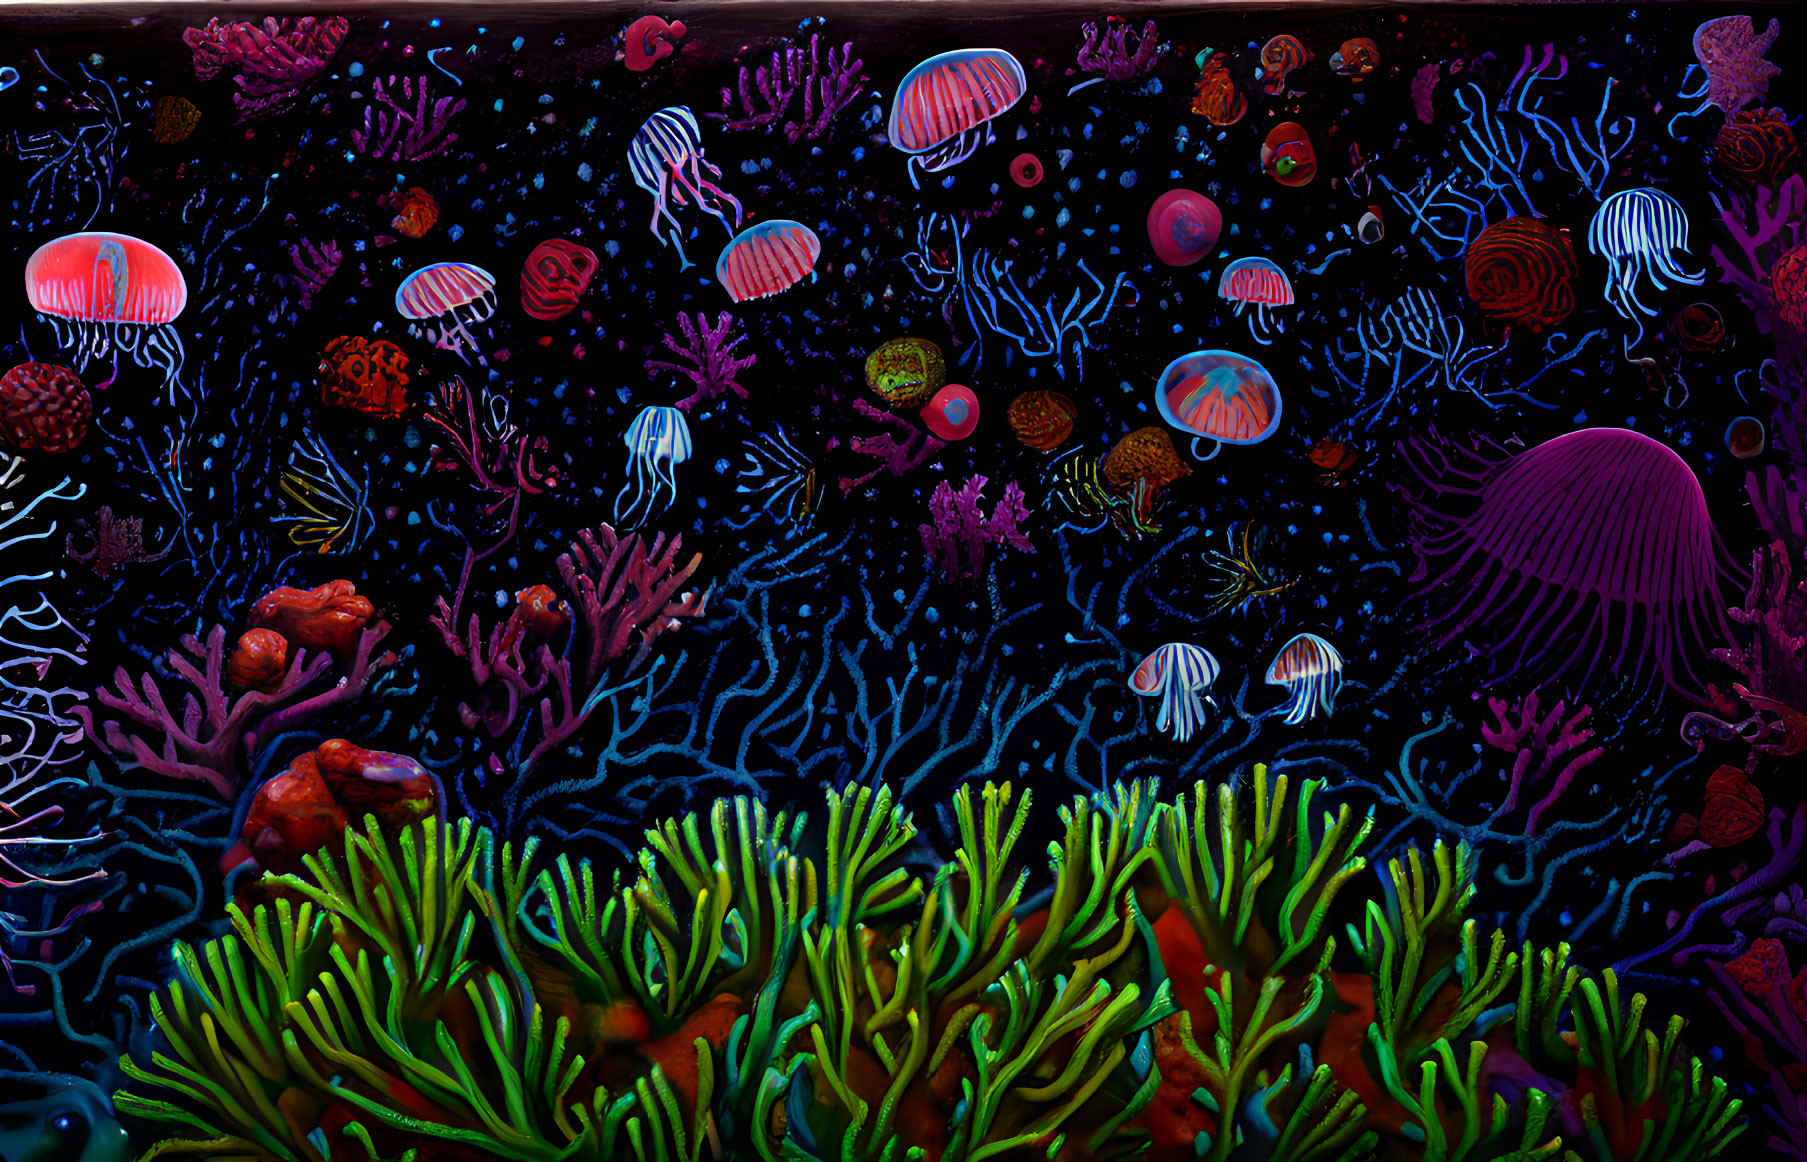 Colorful Jellyfish, Corals, and Sea Anemones in Underwater Scene